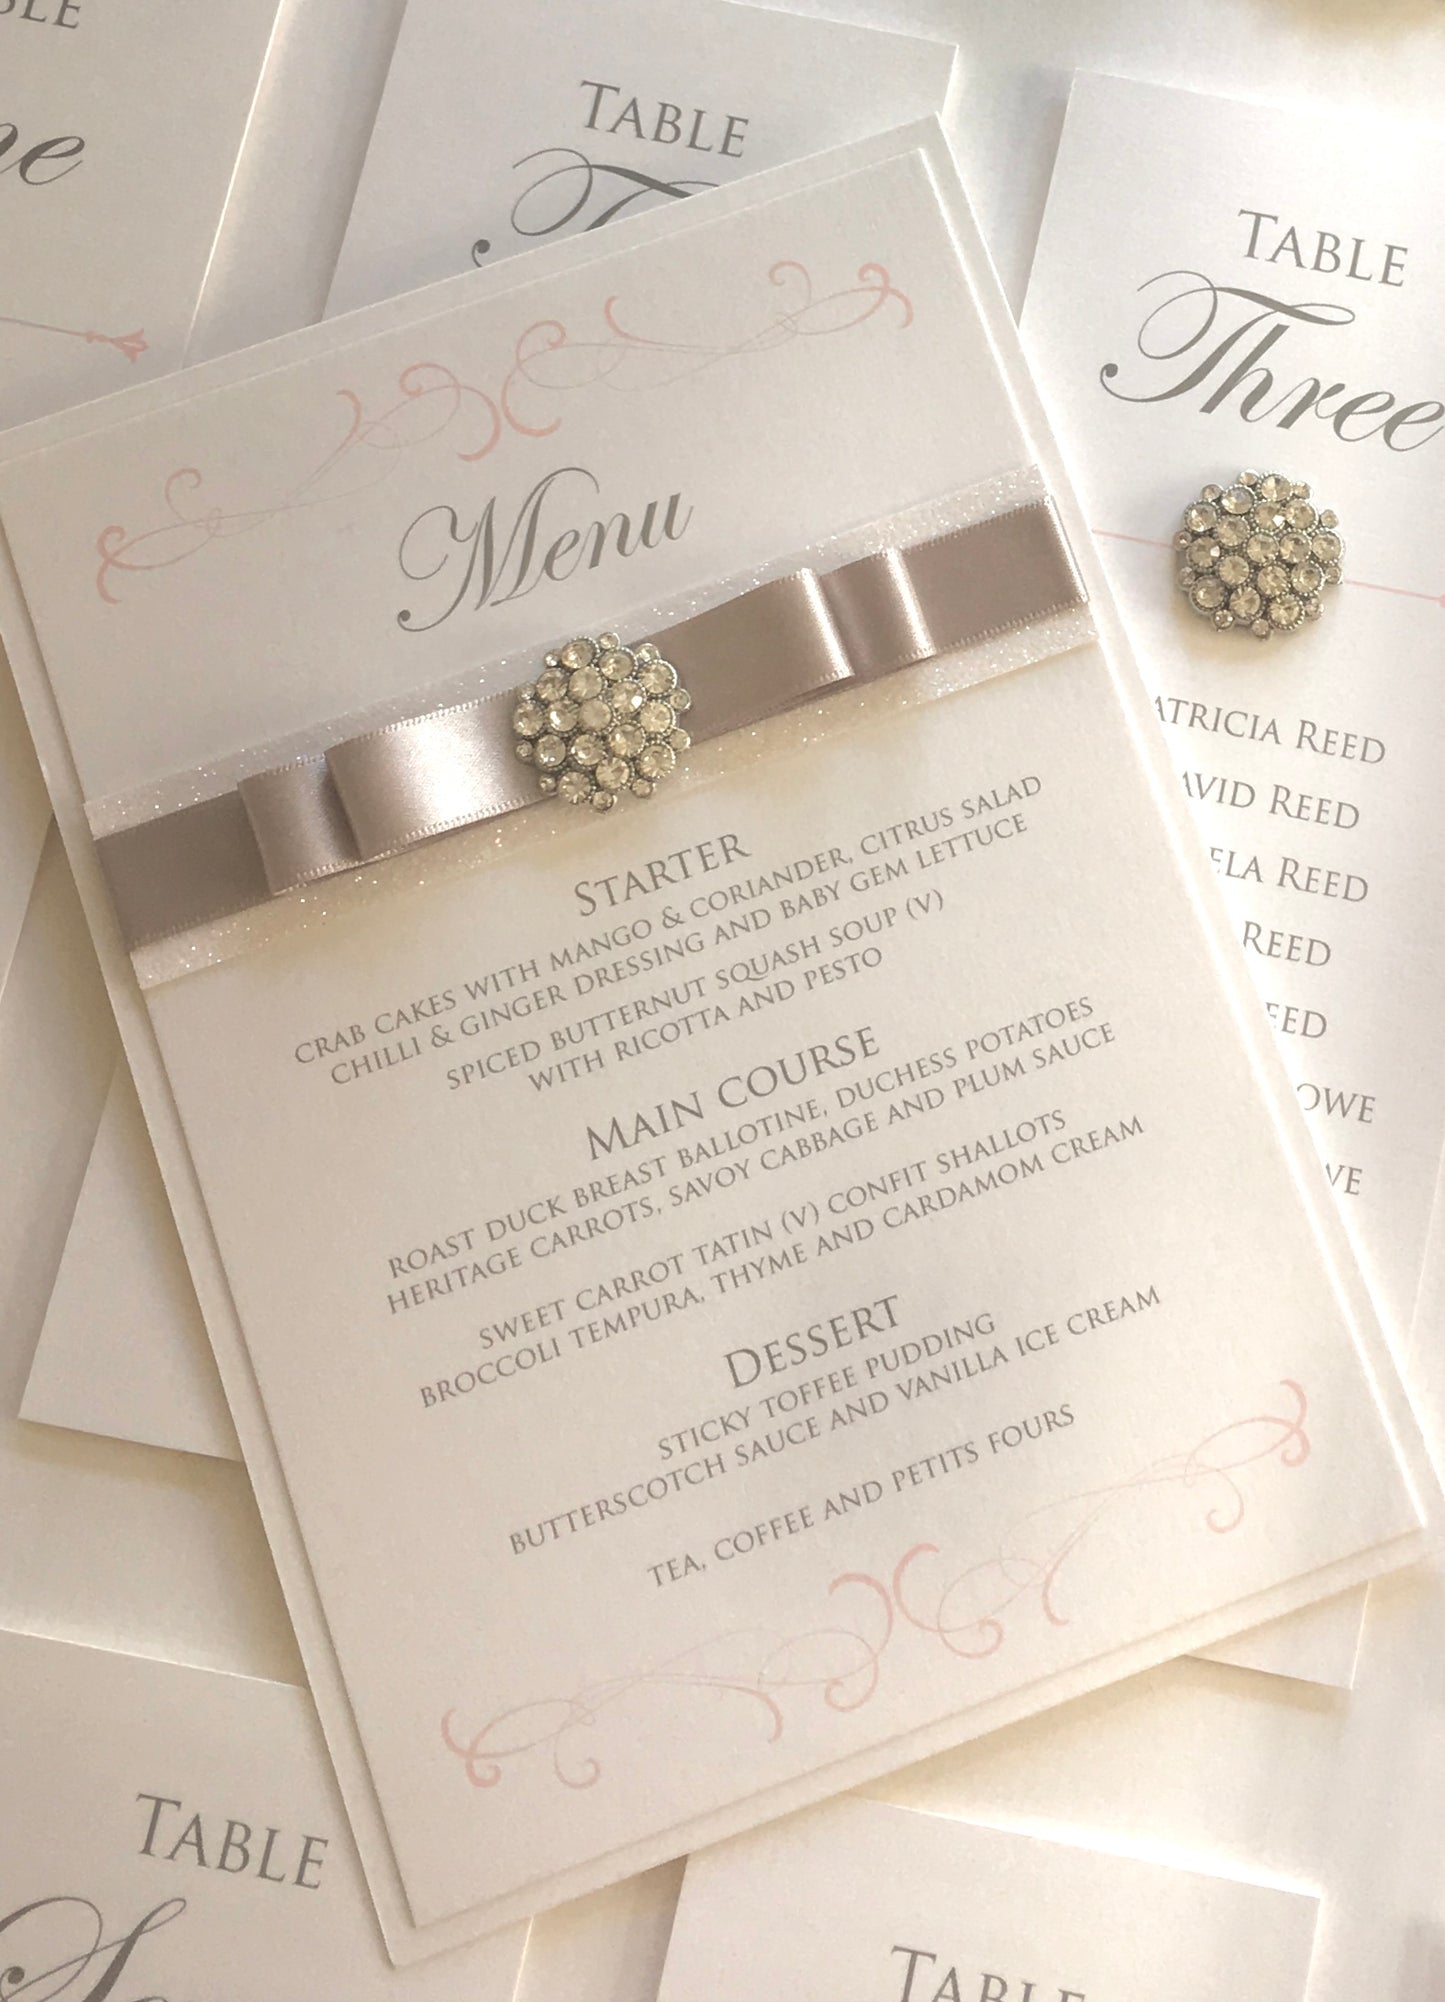 Menu's - for the table